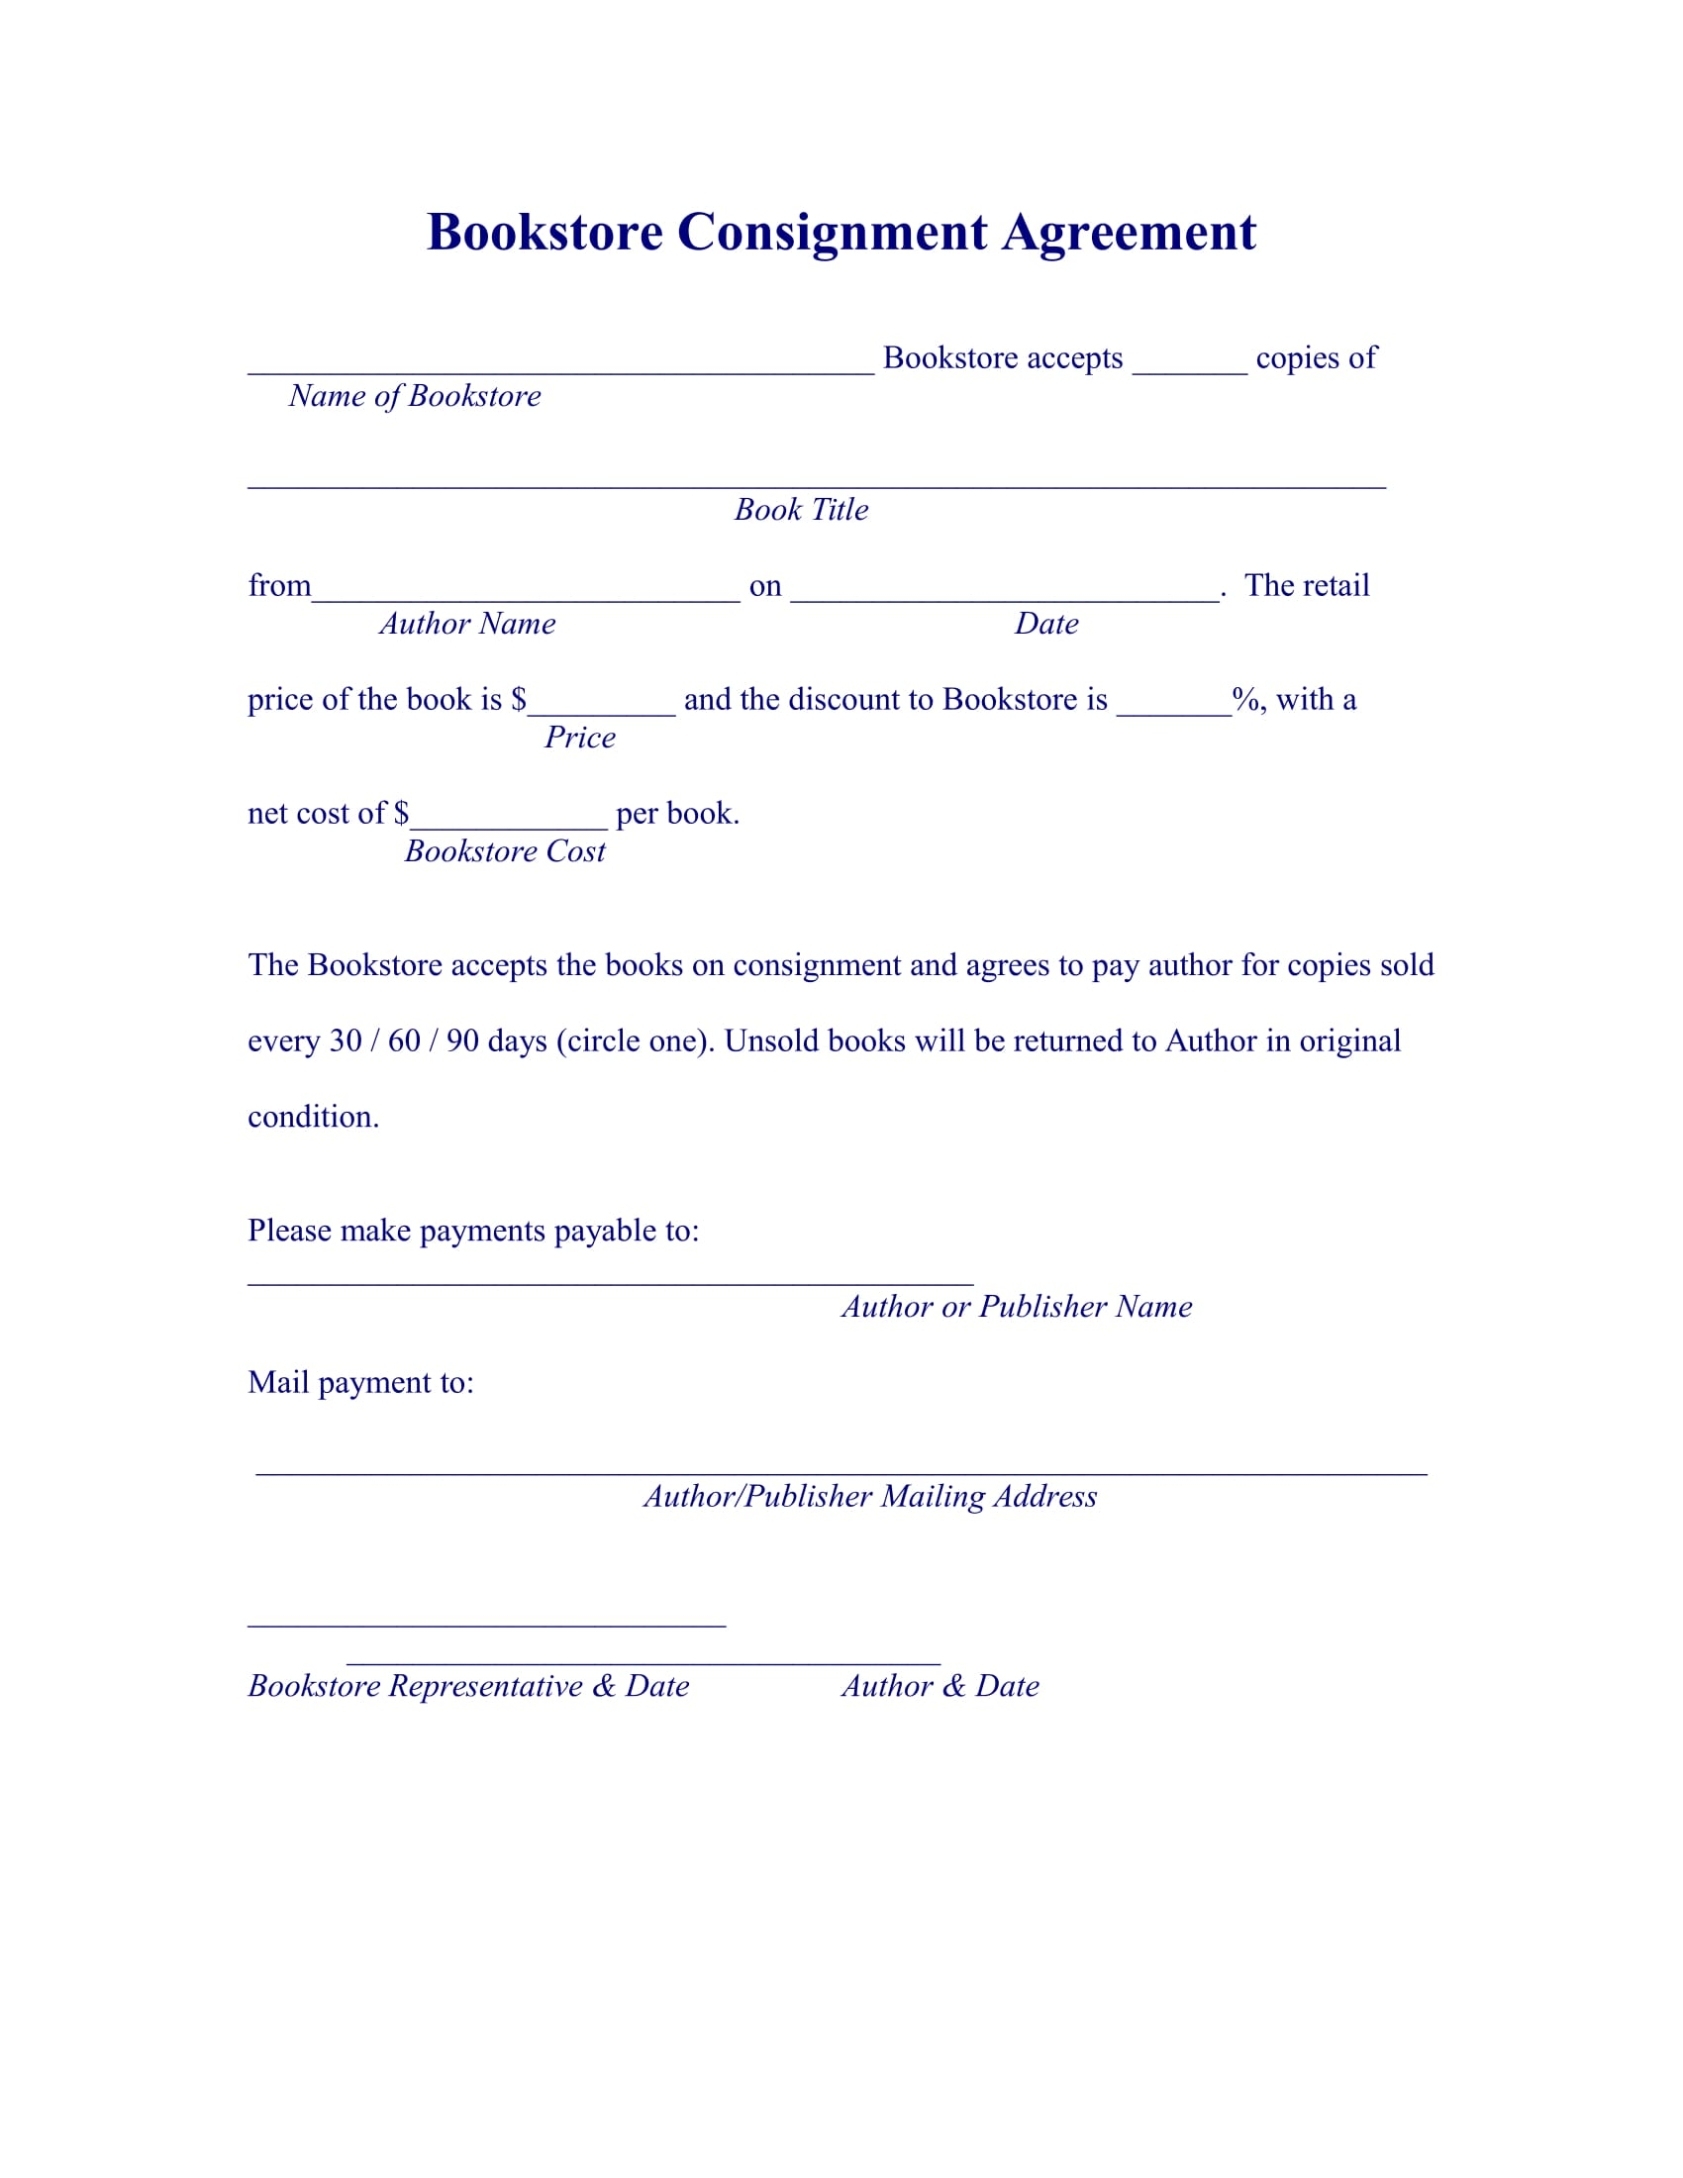 16+ Consignment Agreement Examples - Pdf, Doc | Examples Throughout Simple Consignment Agreement Template